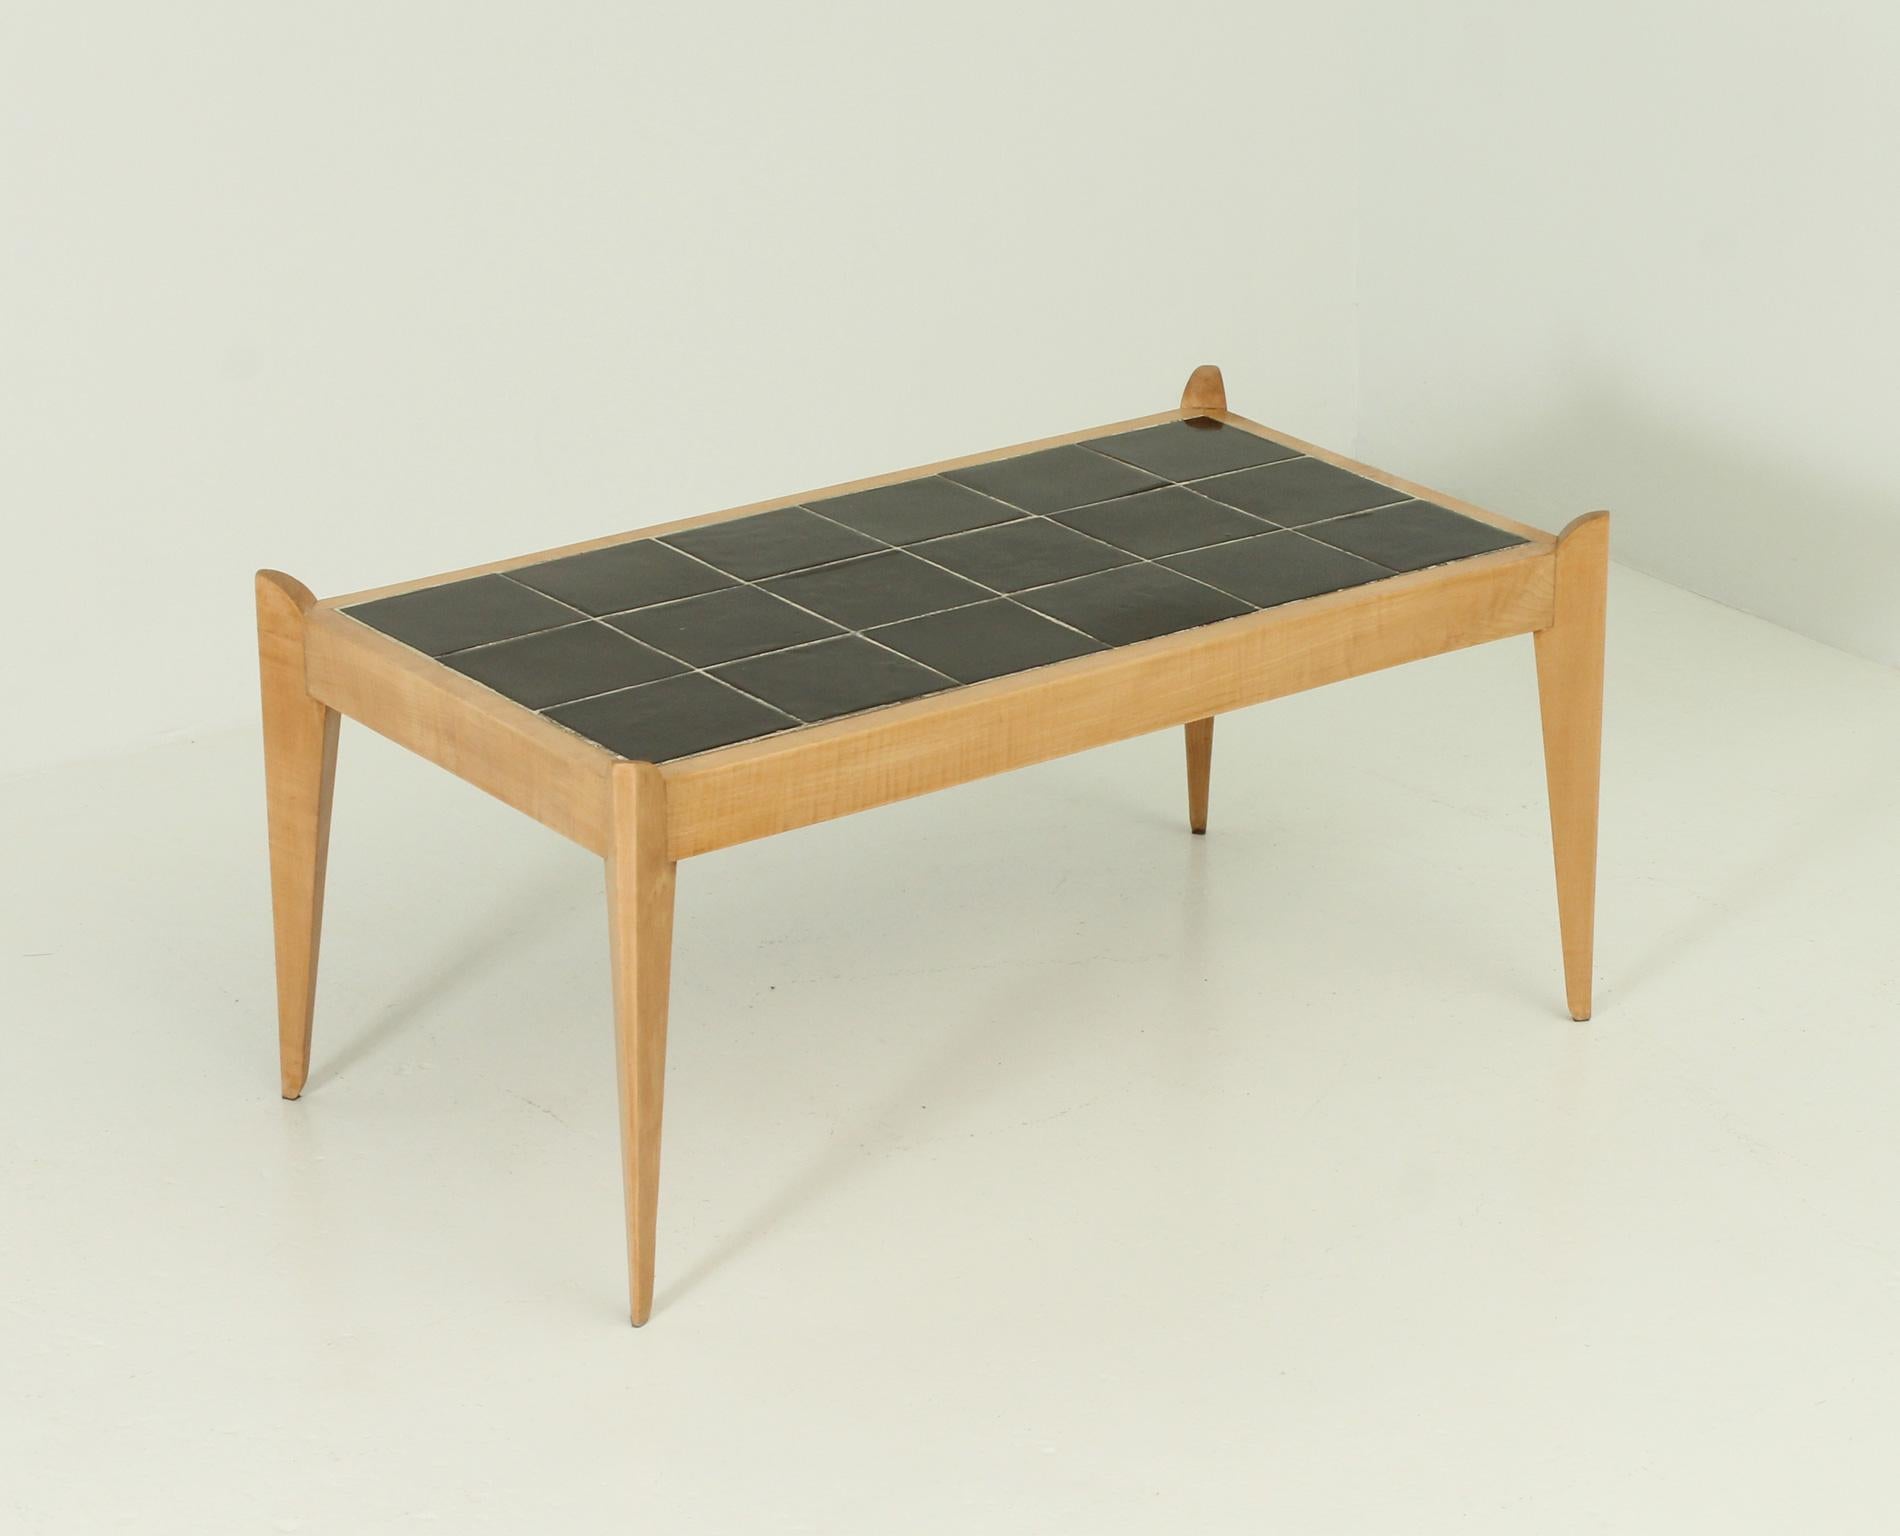 French rectangular coffee table from 1940's. Nice work in sycamore wood with top in black ceramic tiles.